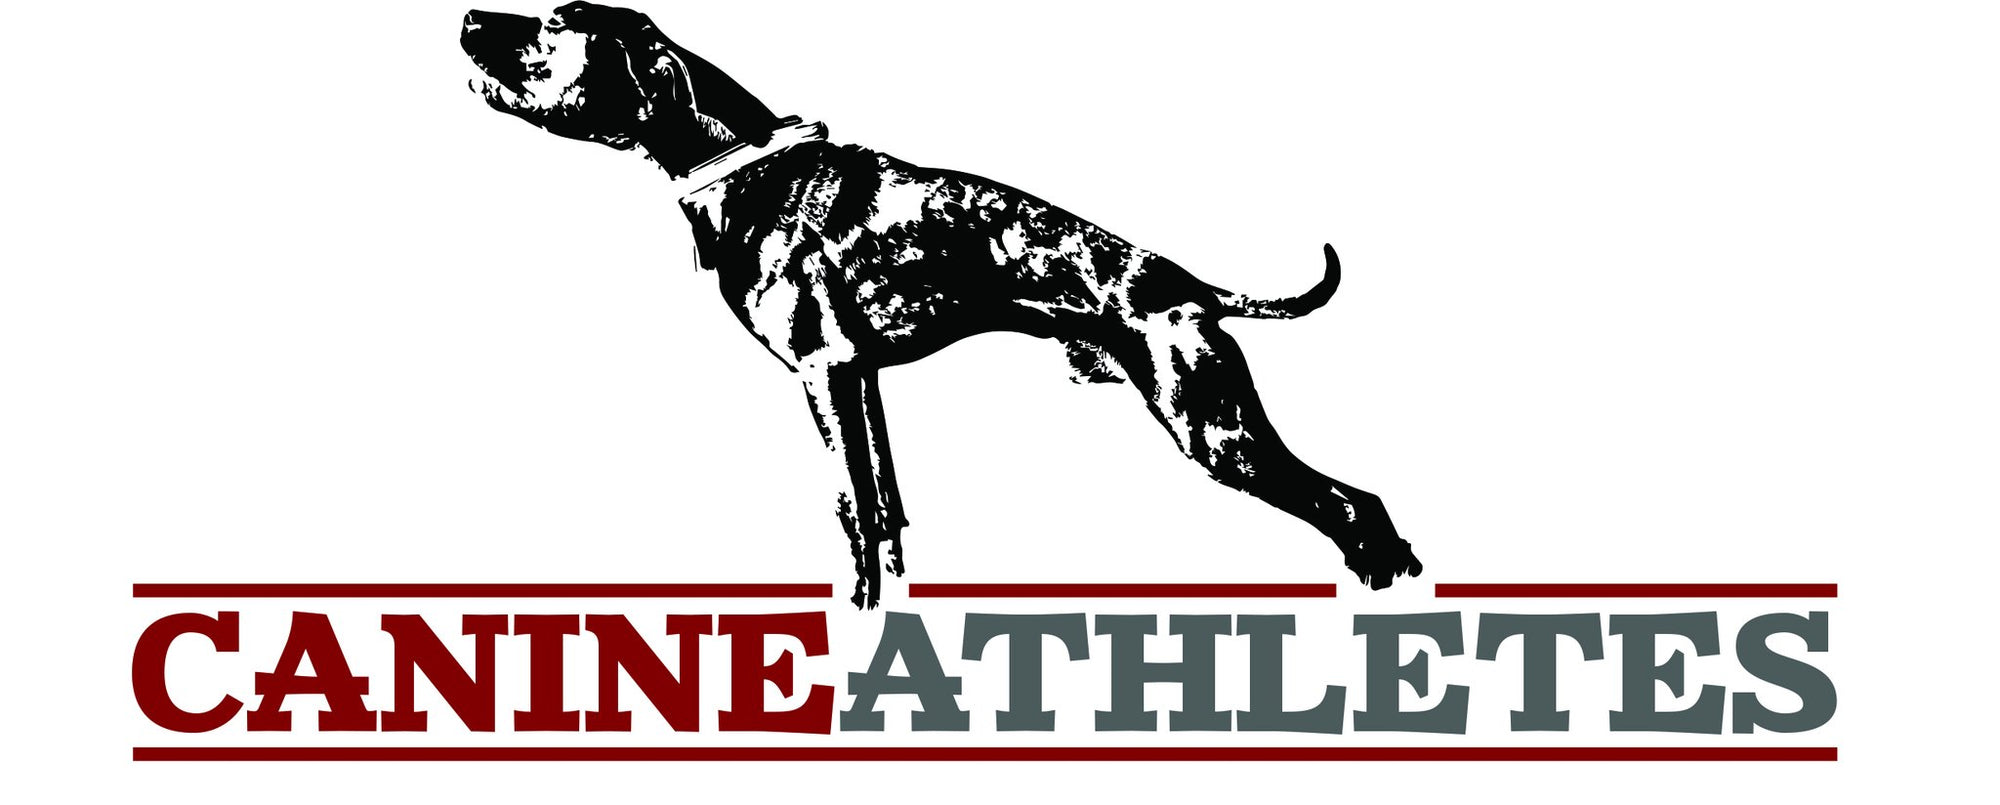 Canine Athletes Vinyl Decal (7" H x 16" L) Accessories canine-athletes